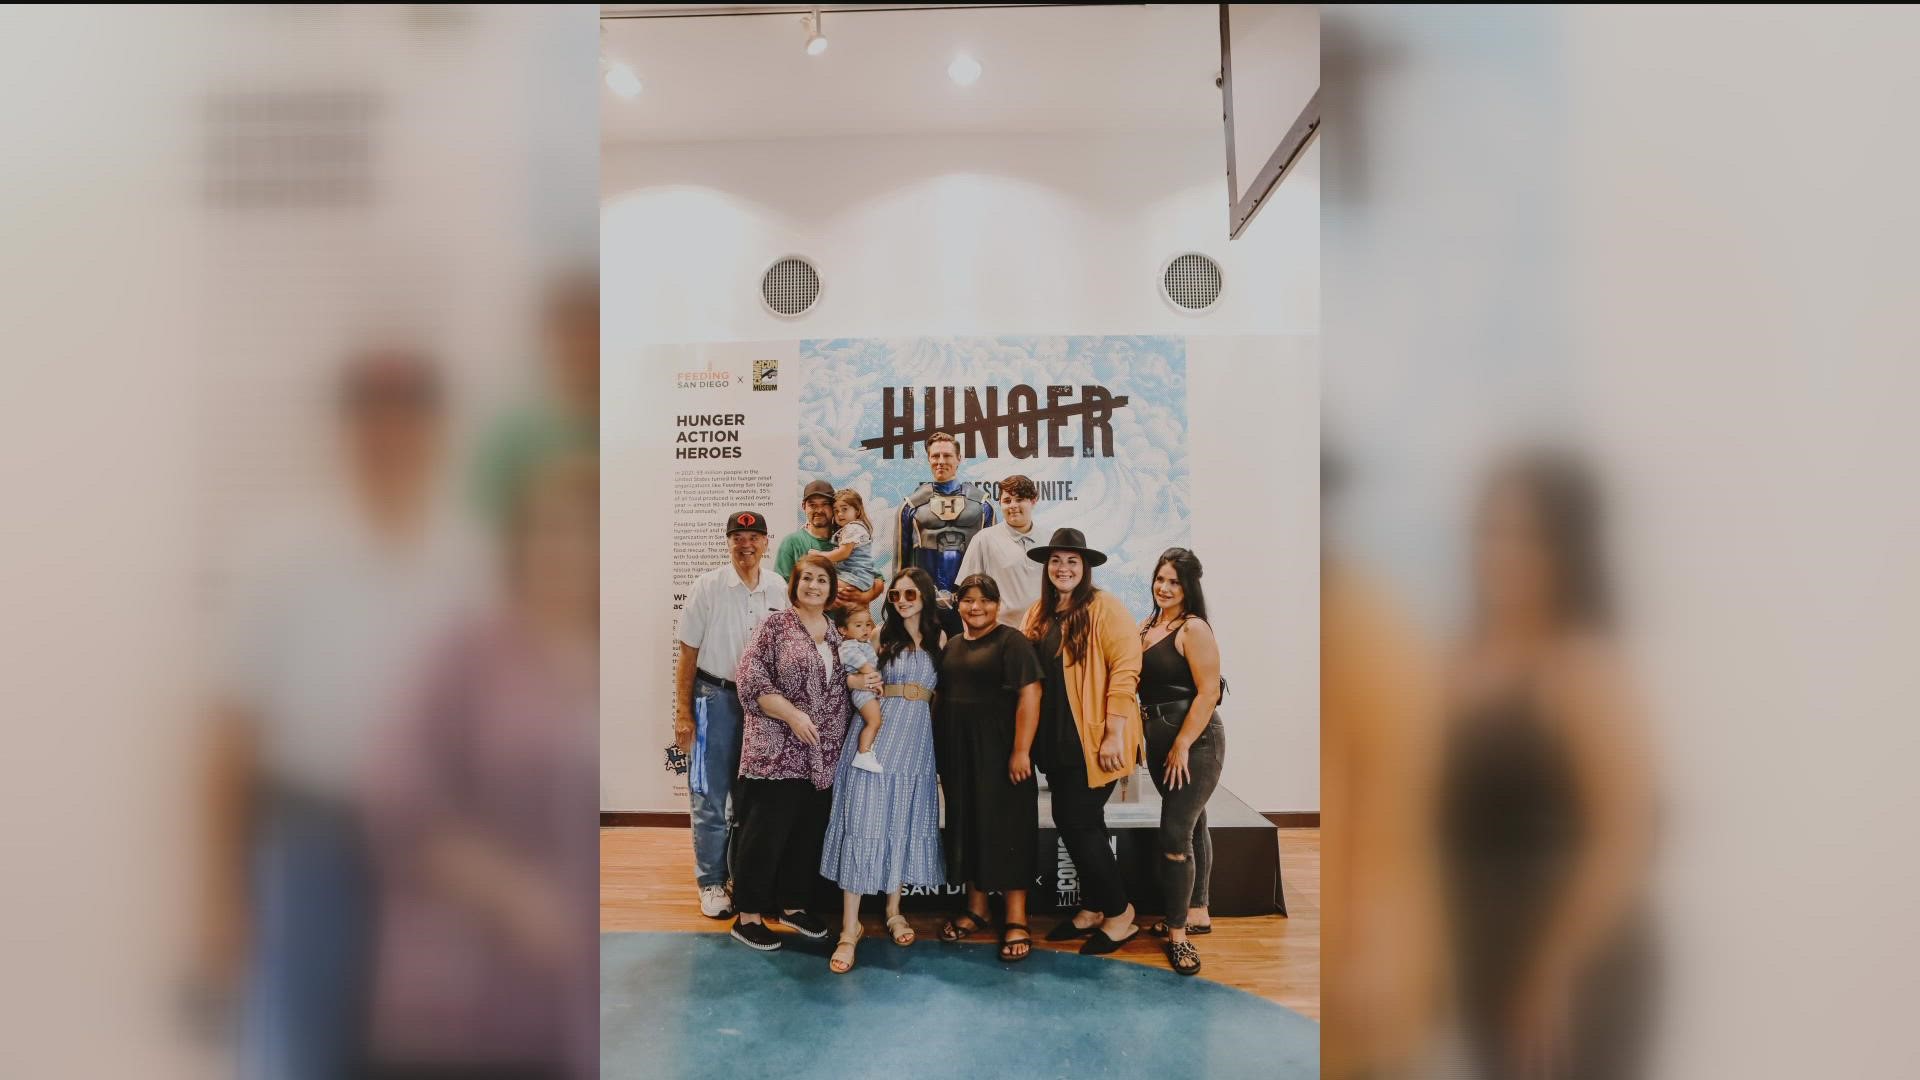 They're superheroes when it comes to fighting hunger, young local artist made it their mission to bring awareness to food insecurity.